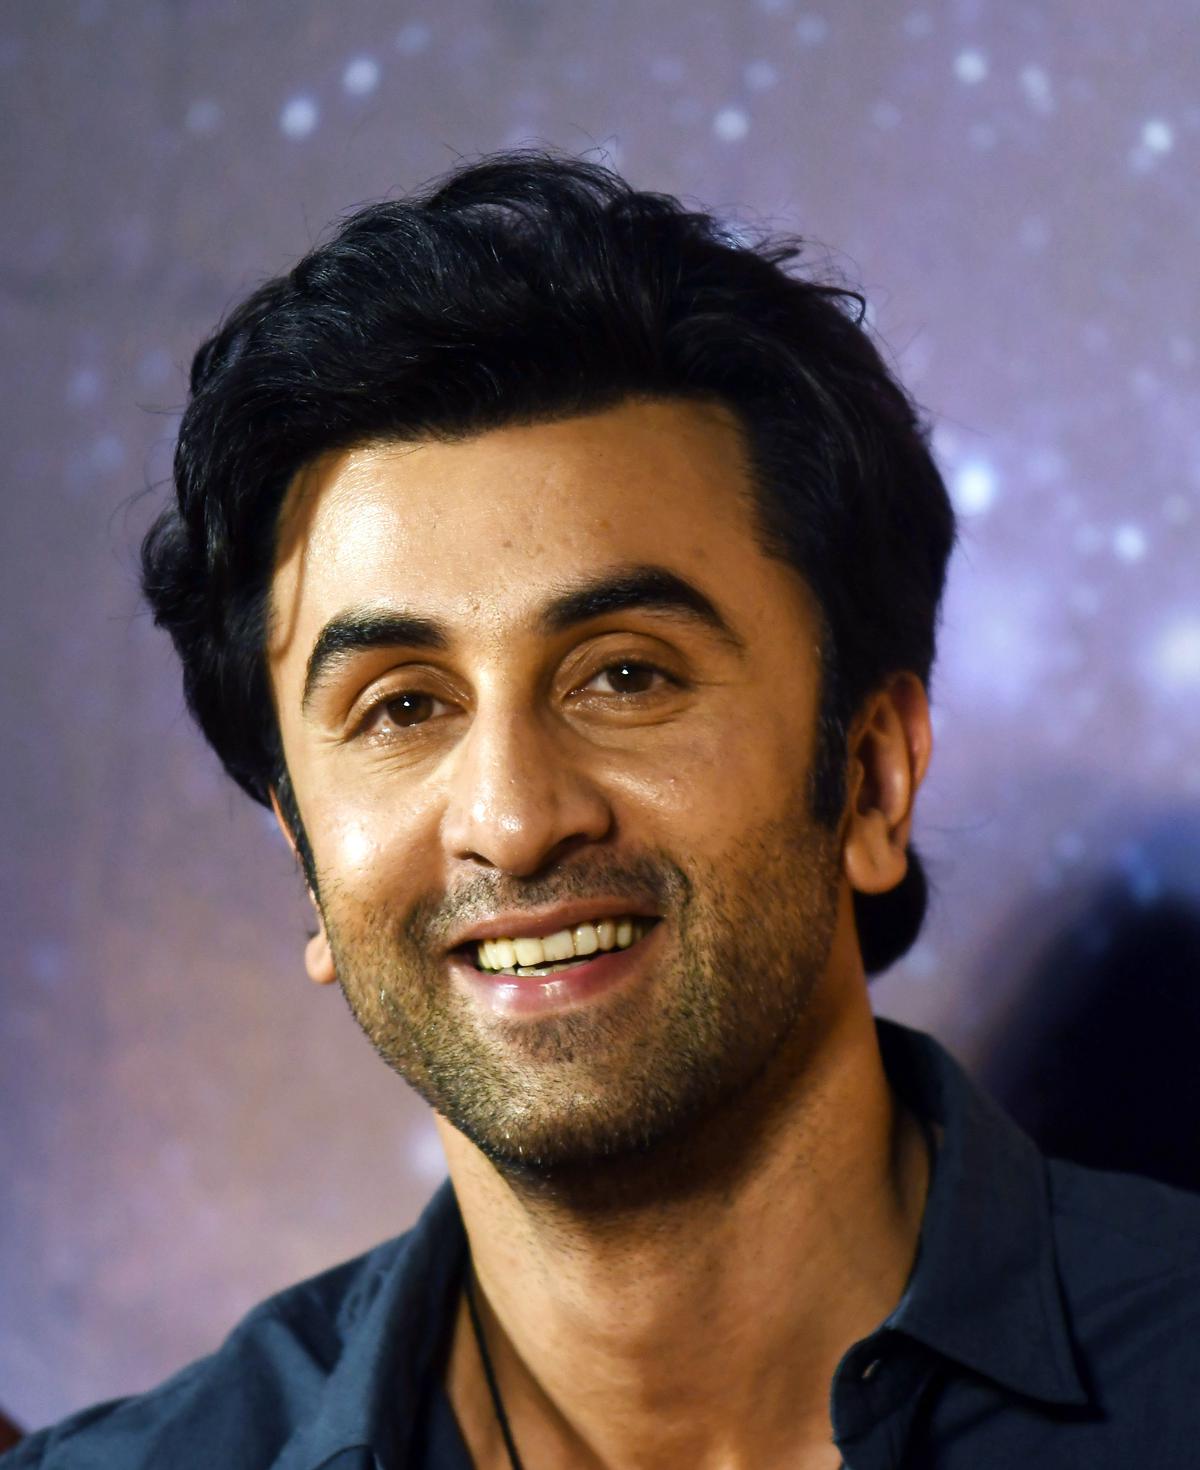 Ranbir Kapoor summoned in the Mahadev app case: What's the betting racket,  how is the actor involved?